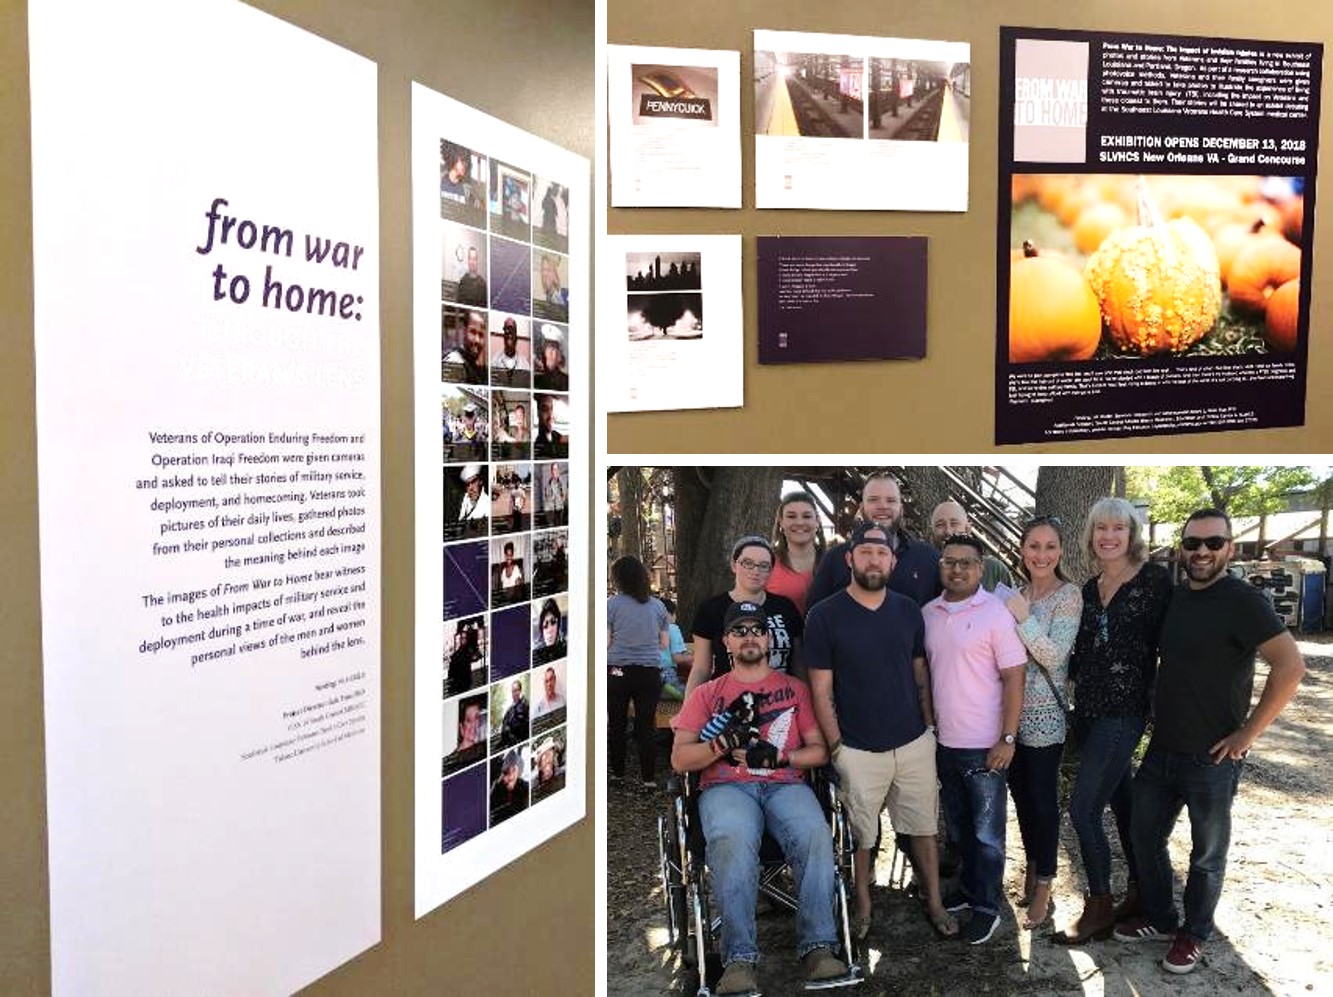 Gala True's War to Home Exhibit and Team